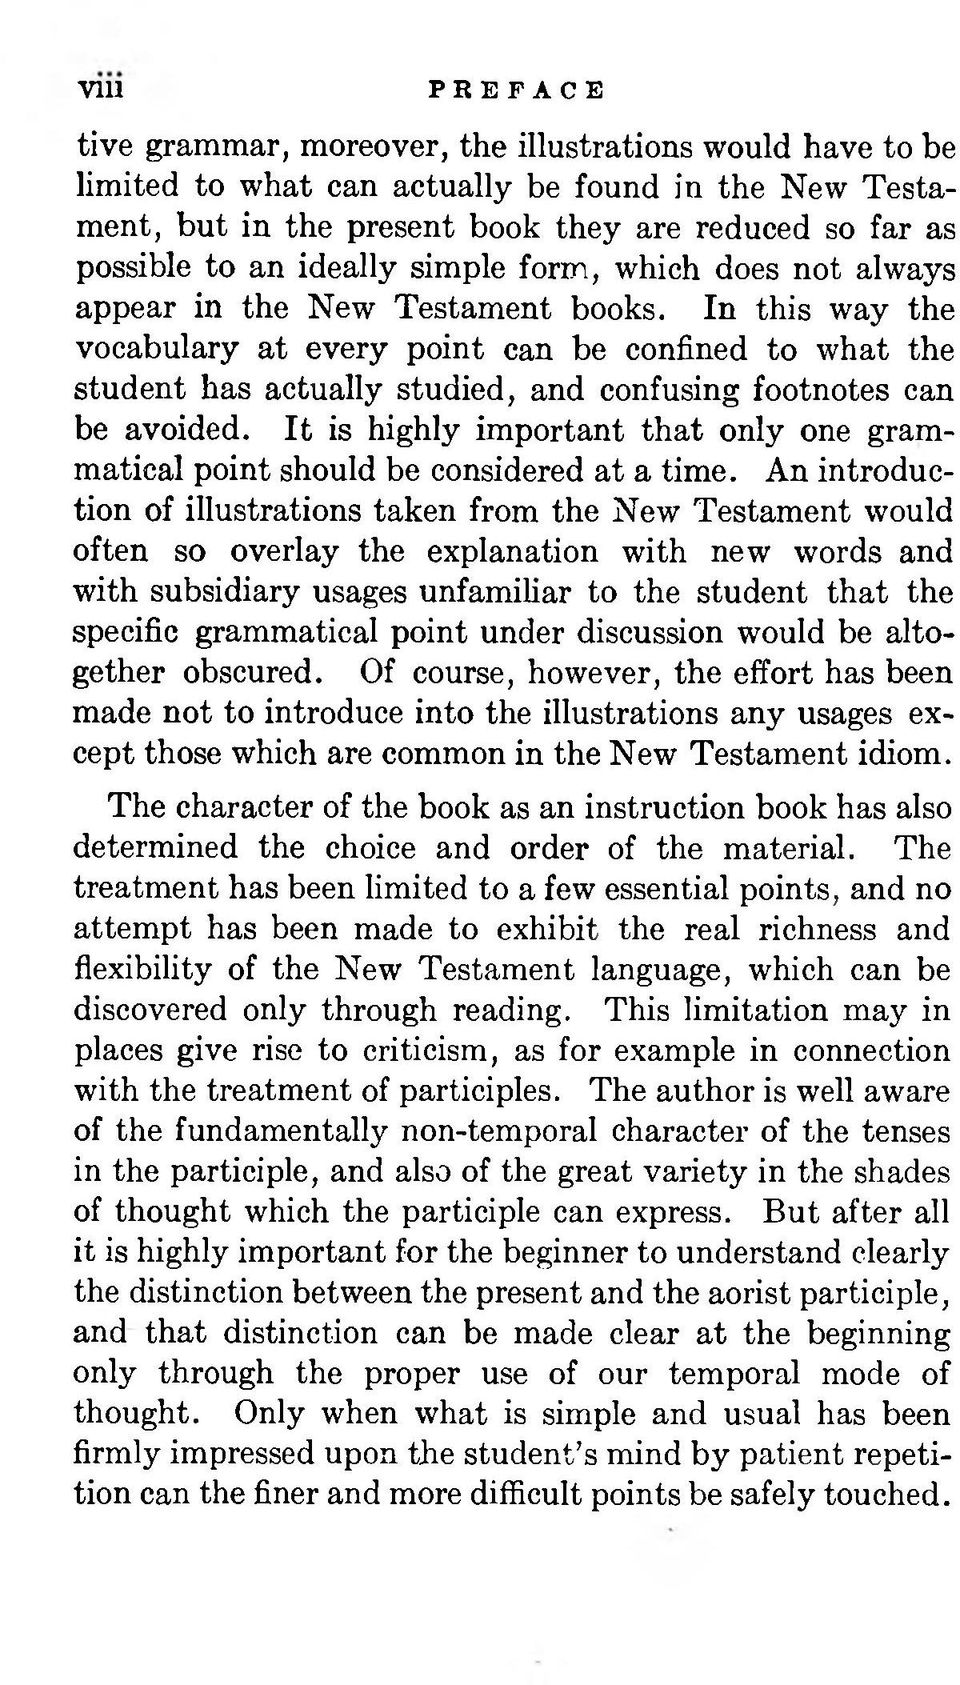 In this way the vocabulary at every point can be confined to what the student has actually studied, and confusing footnotes can be avoided.